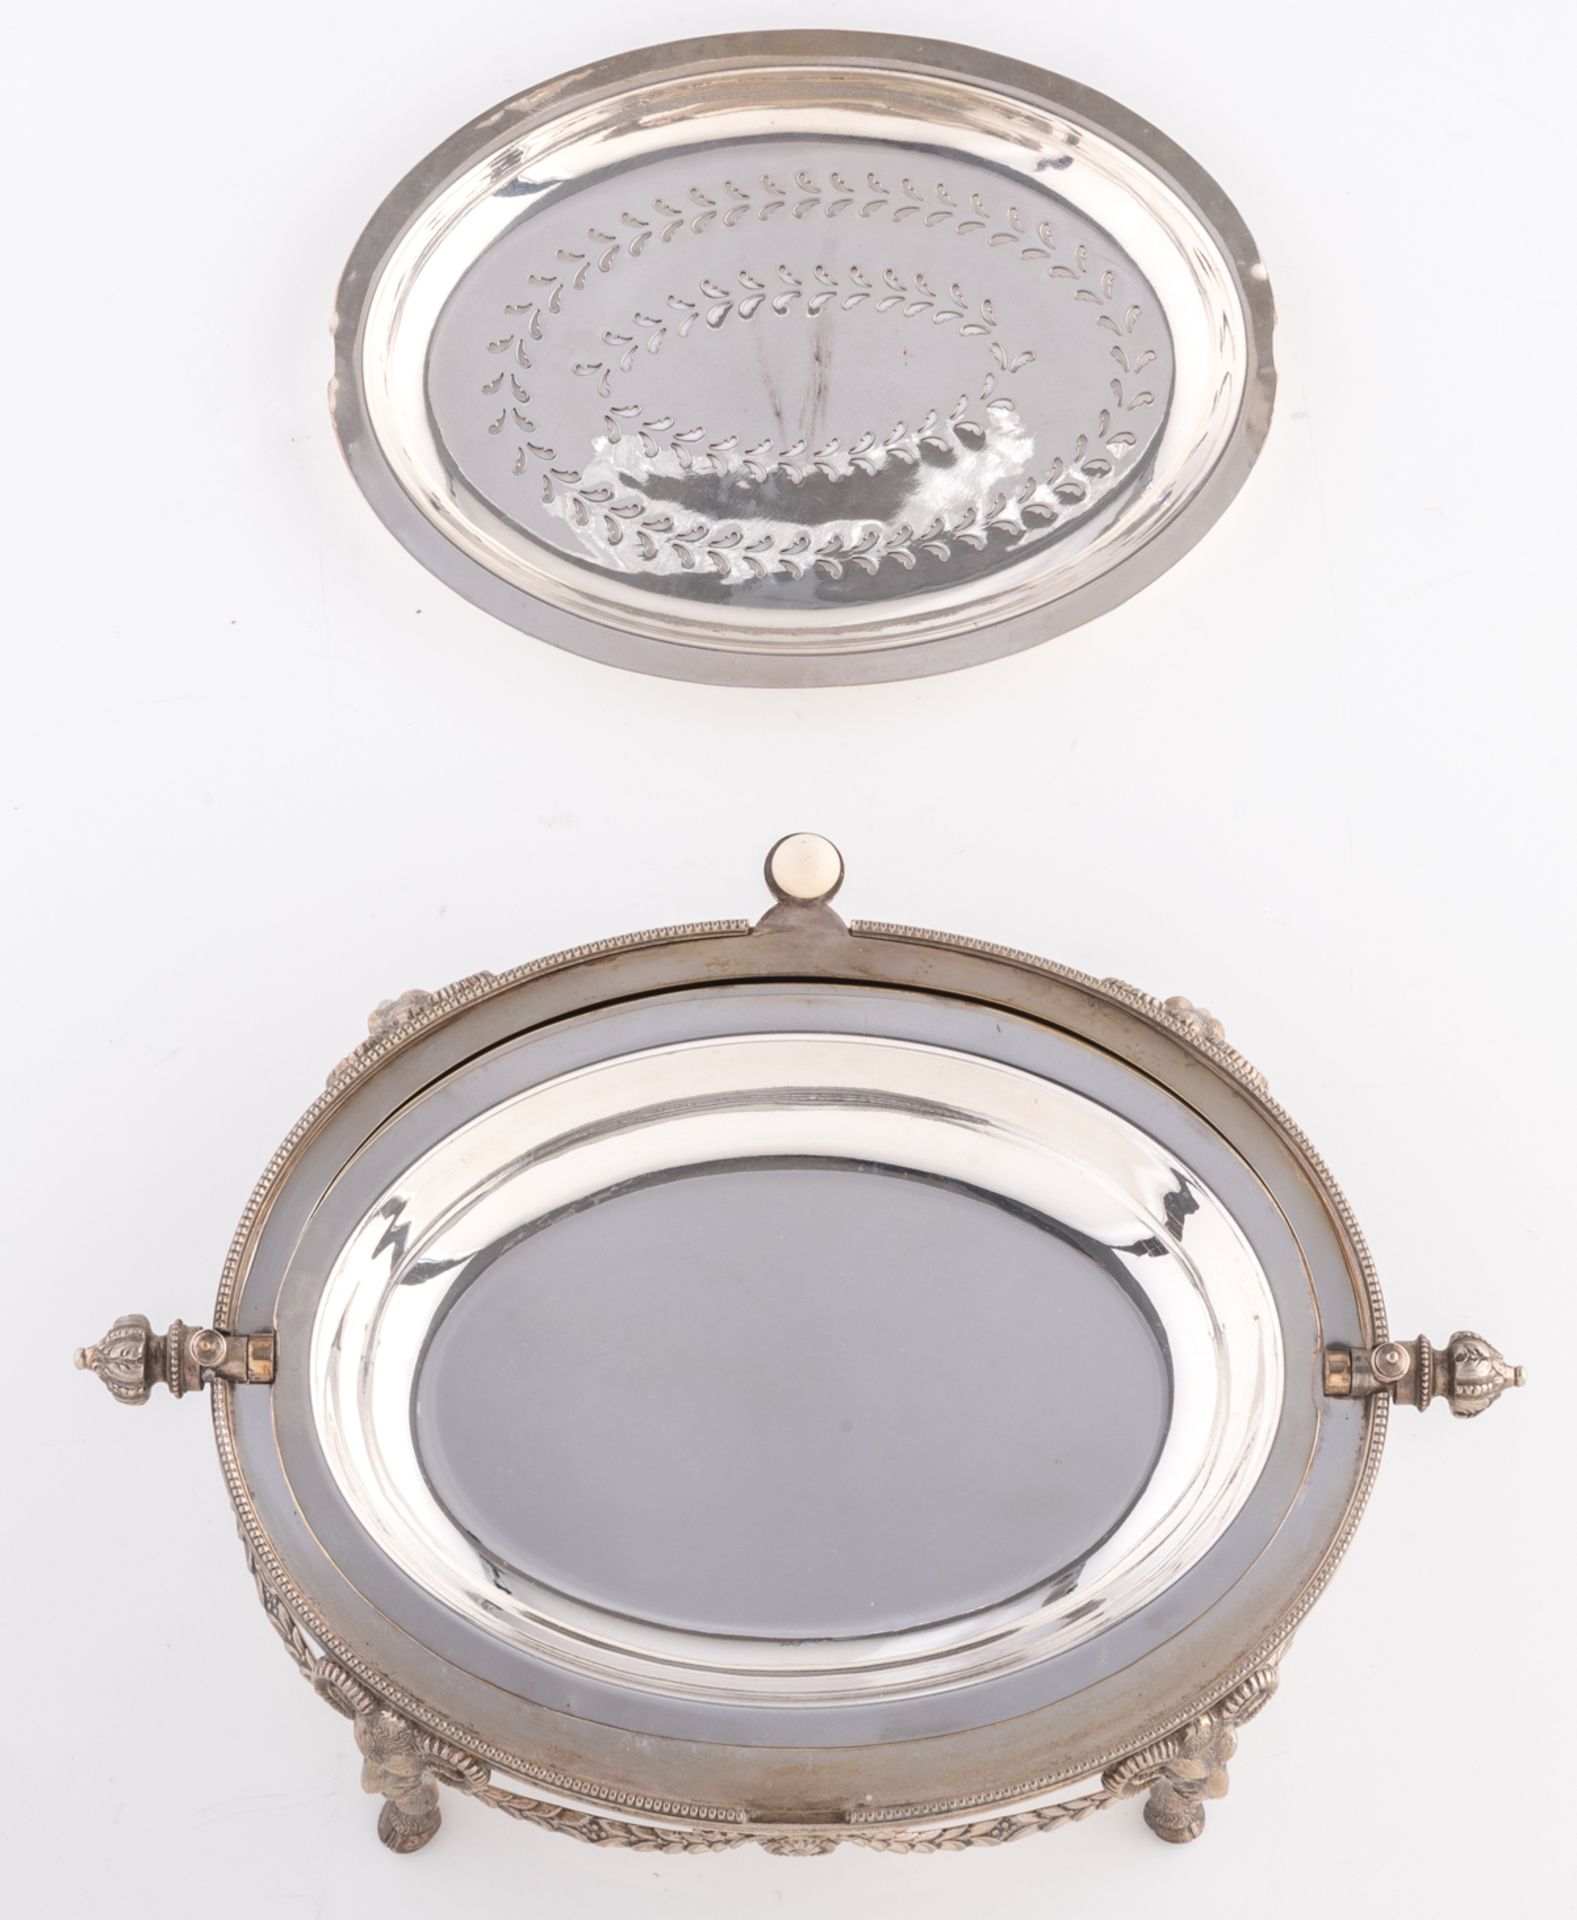 An English silver plated neoclassical covered caviar server with a bone handle, H 25 - W 38 - D 24 c - Bild 8 aus 10